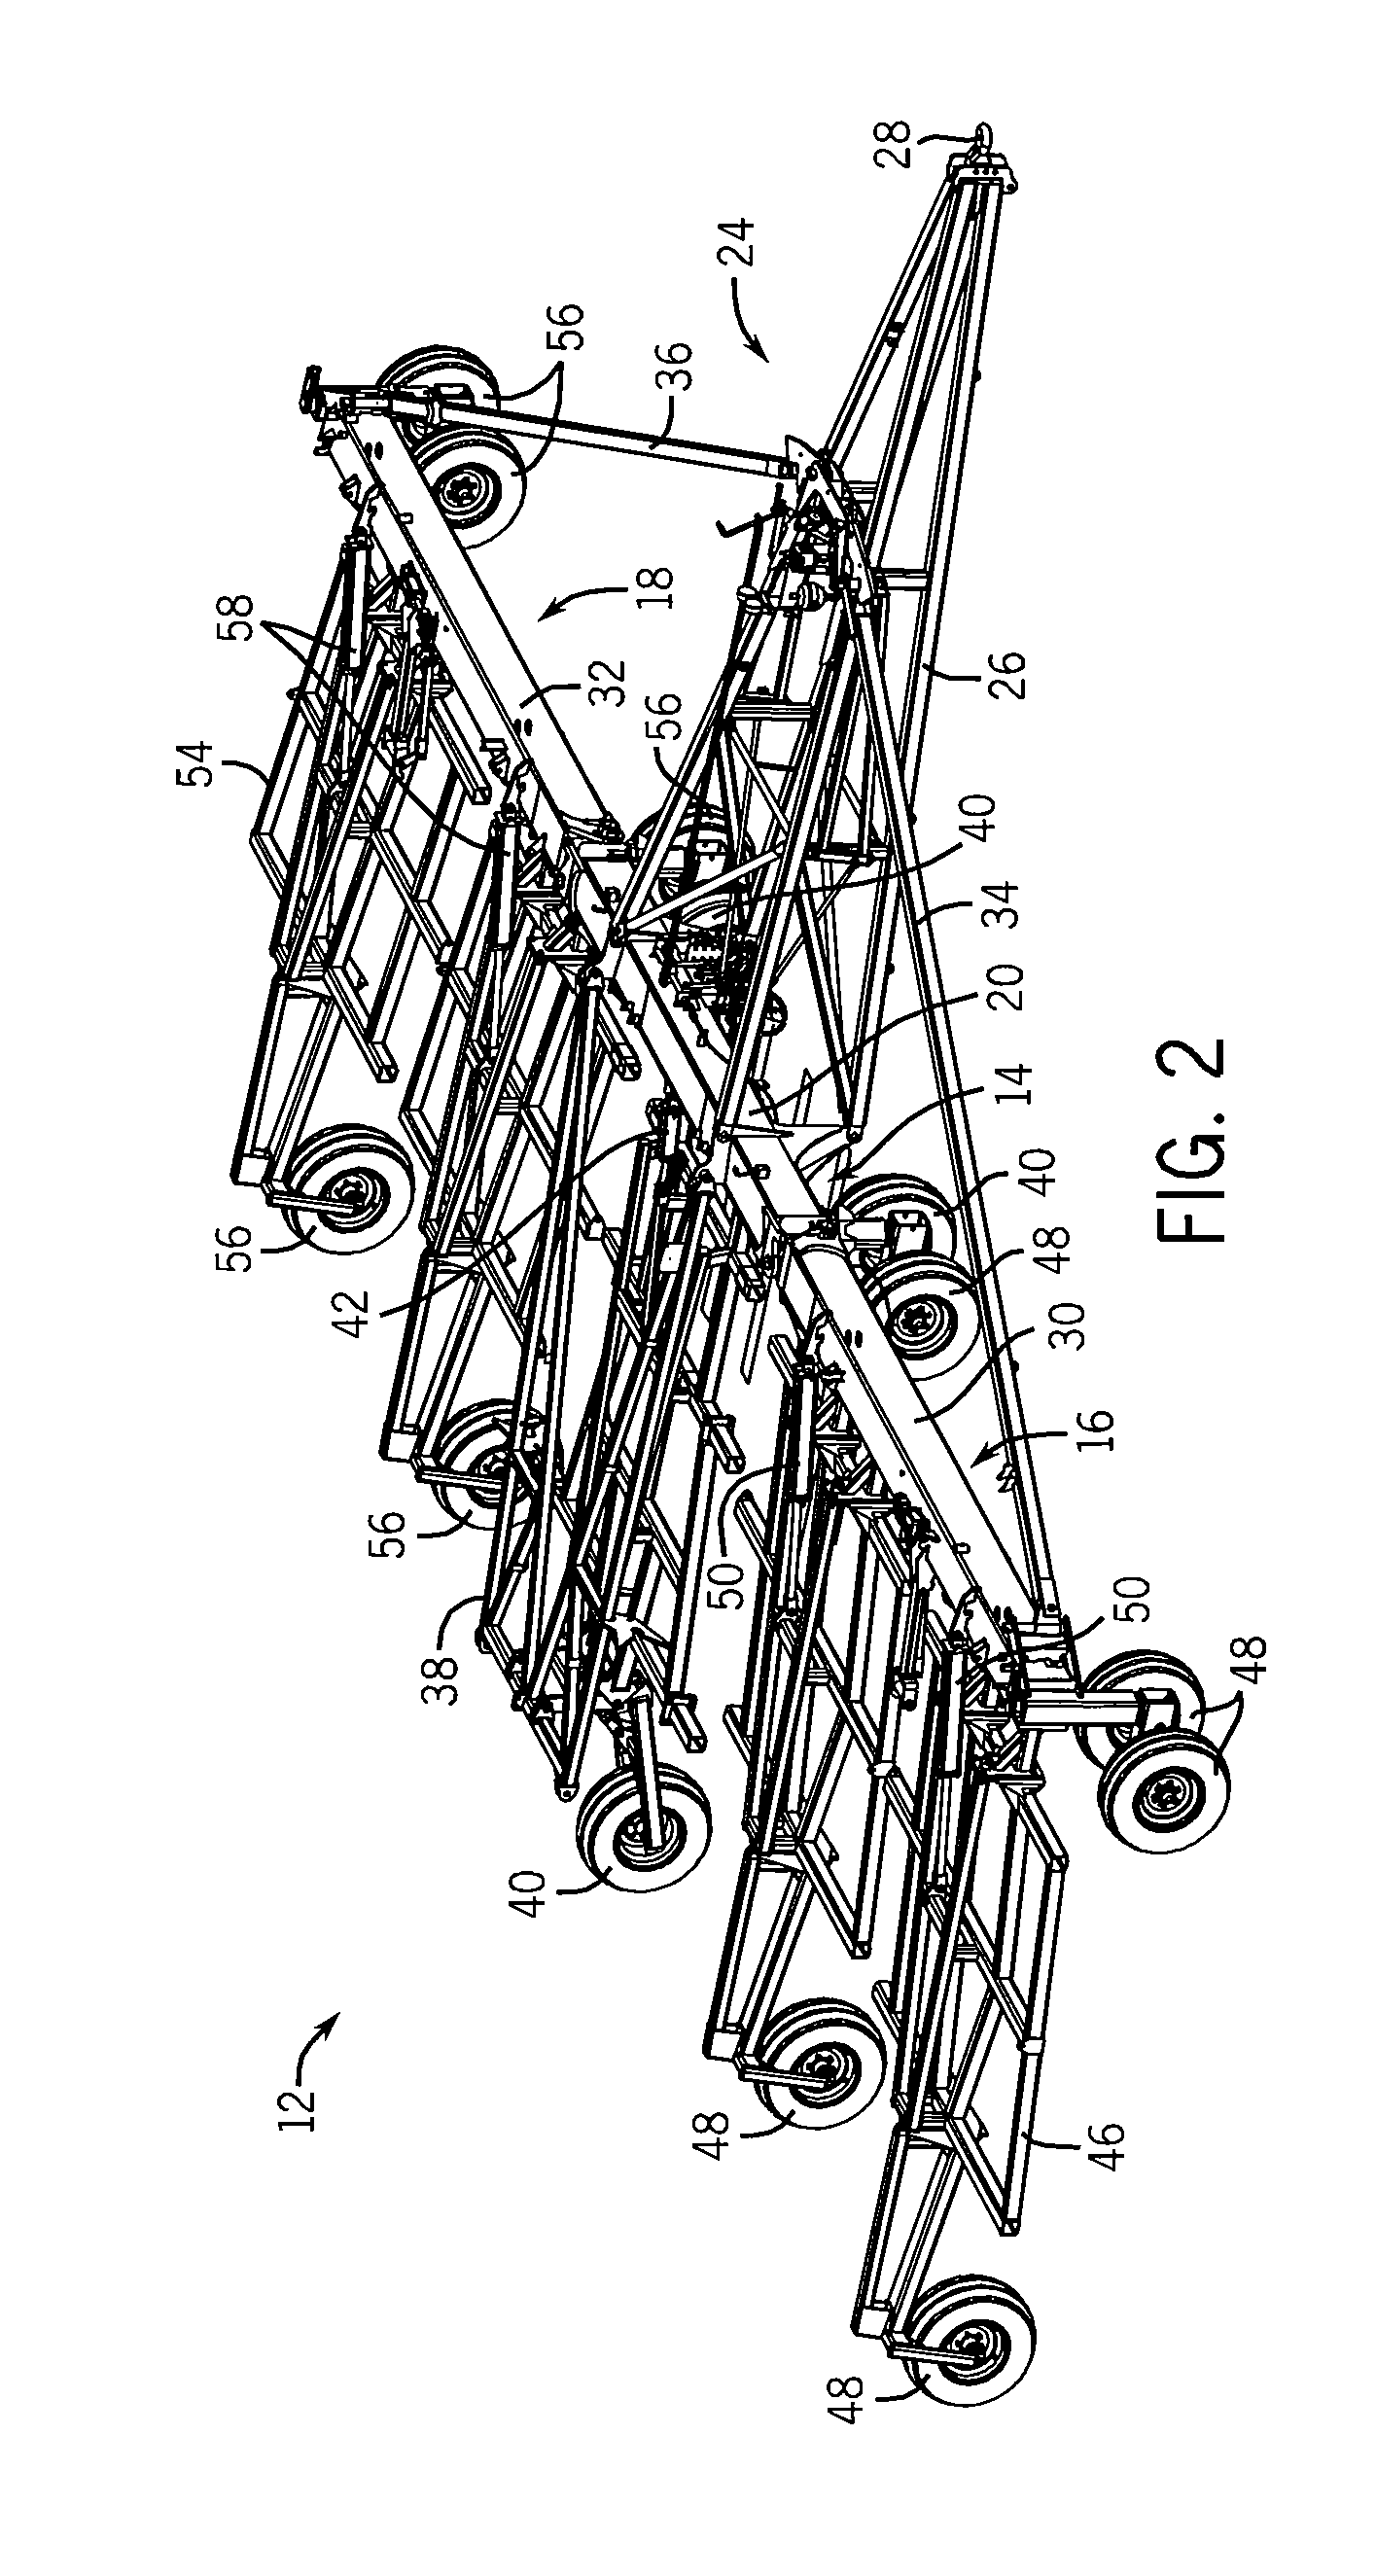 Electronically Controlled Hydraulic System For An Agricultural Implement